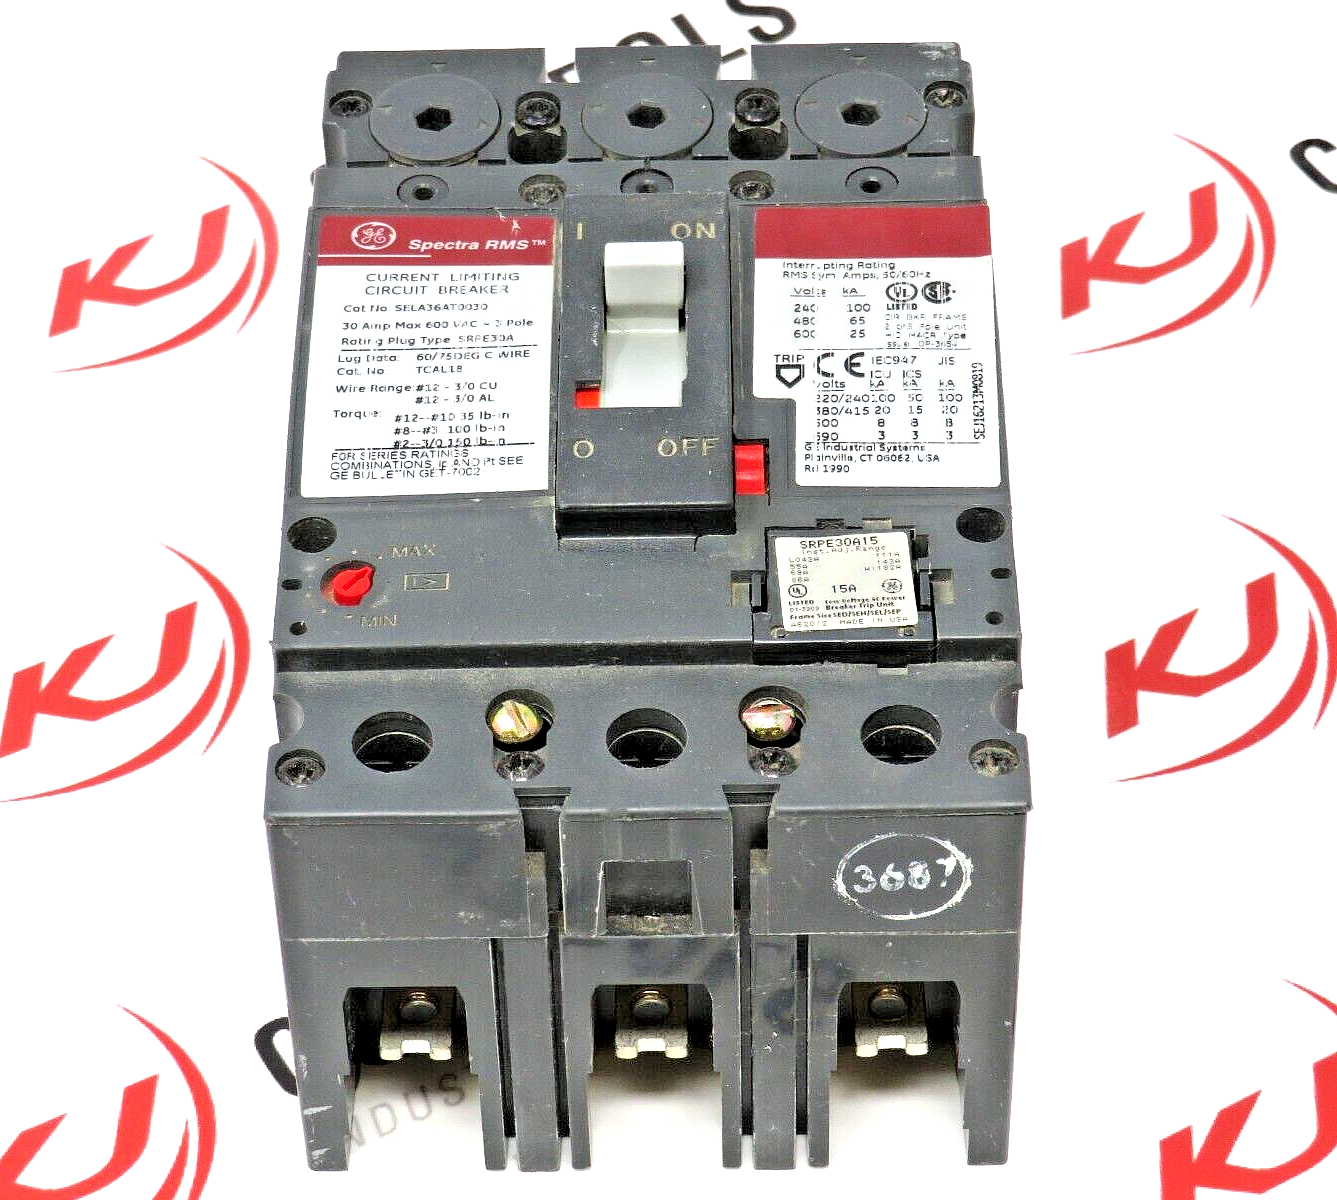 General Electric SELA36AT0030 Circuit Breaker 30A 3-Pole 3-Phase 600VAC Bolt-On